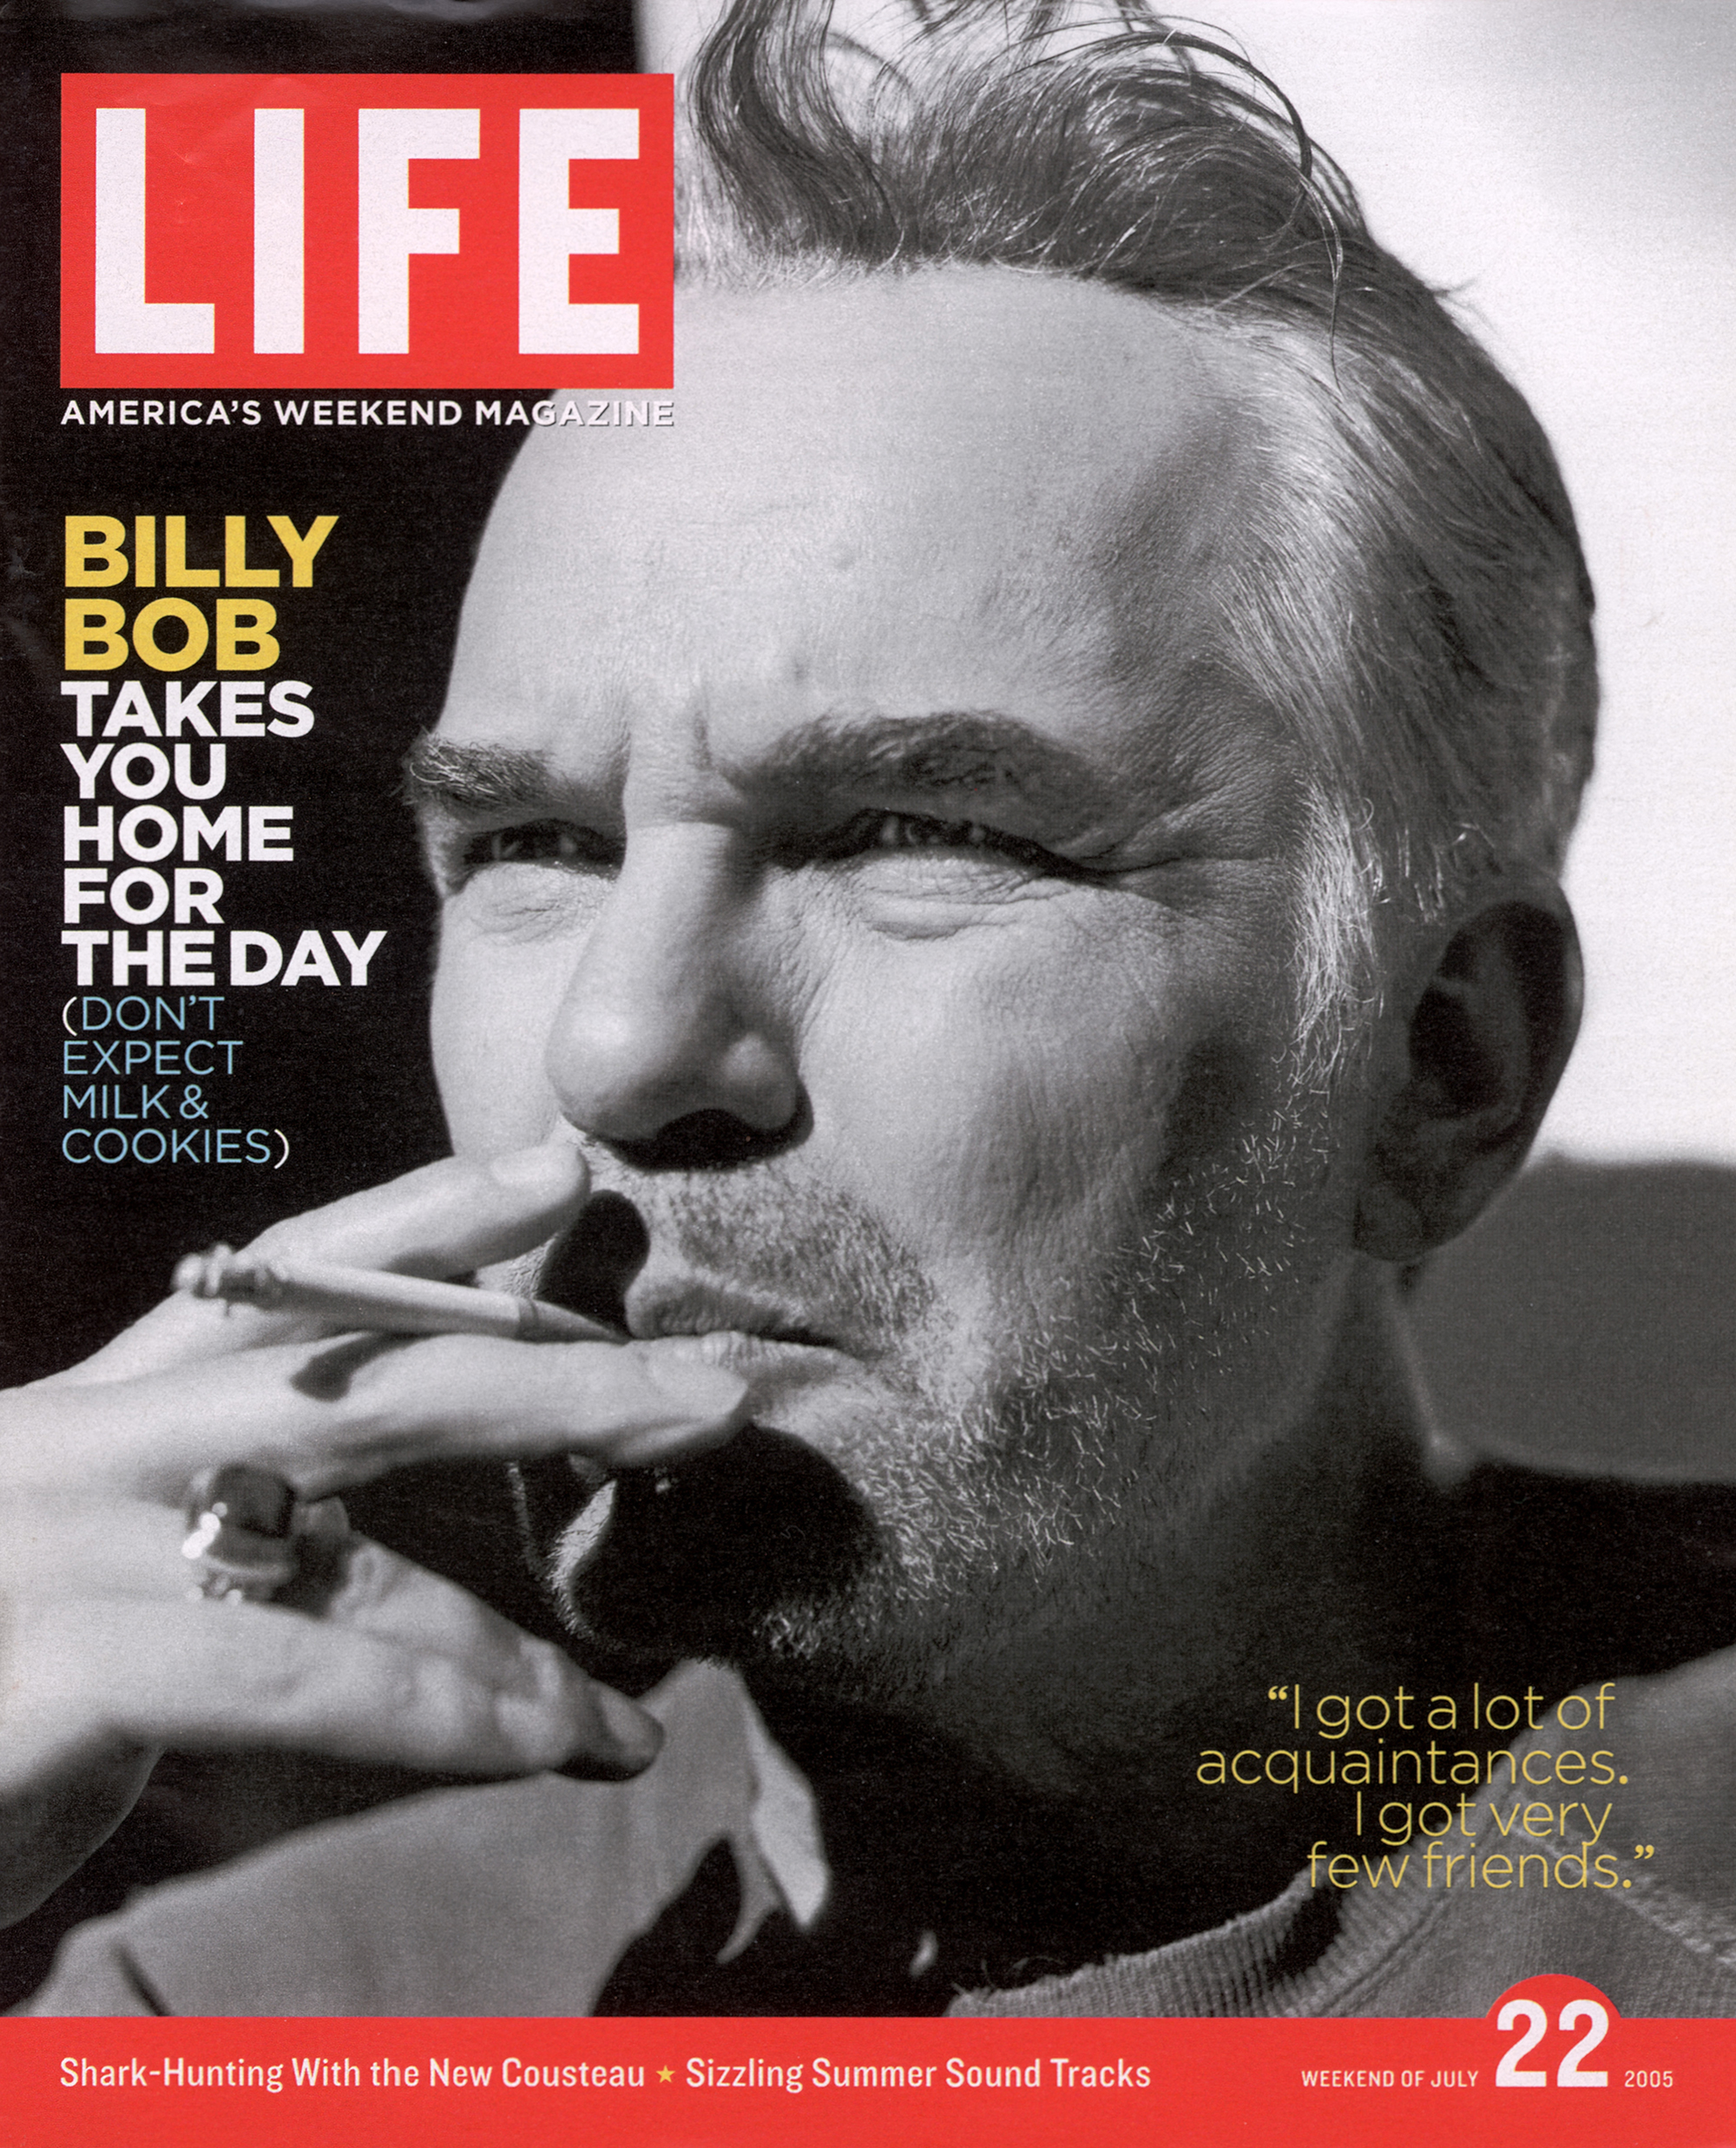 LIFE Cover 07-22-2005 of actor Billy Bob Thornton smoking a cigarette.